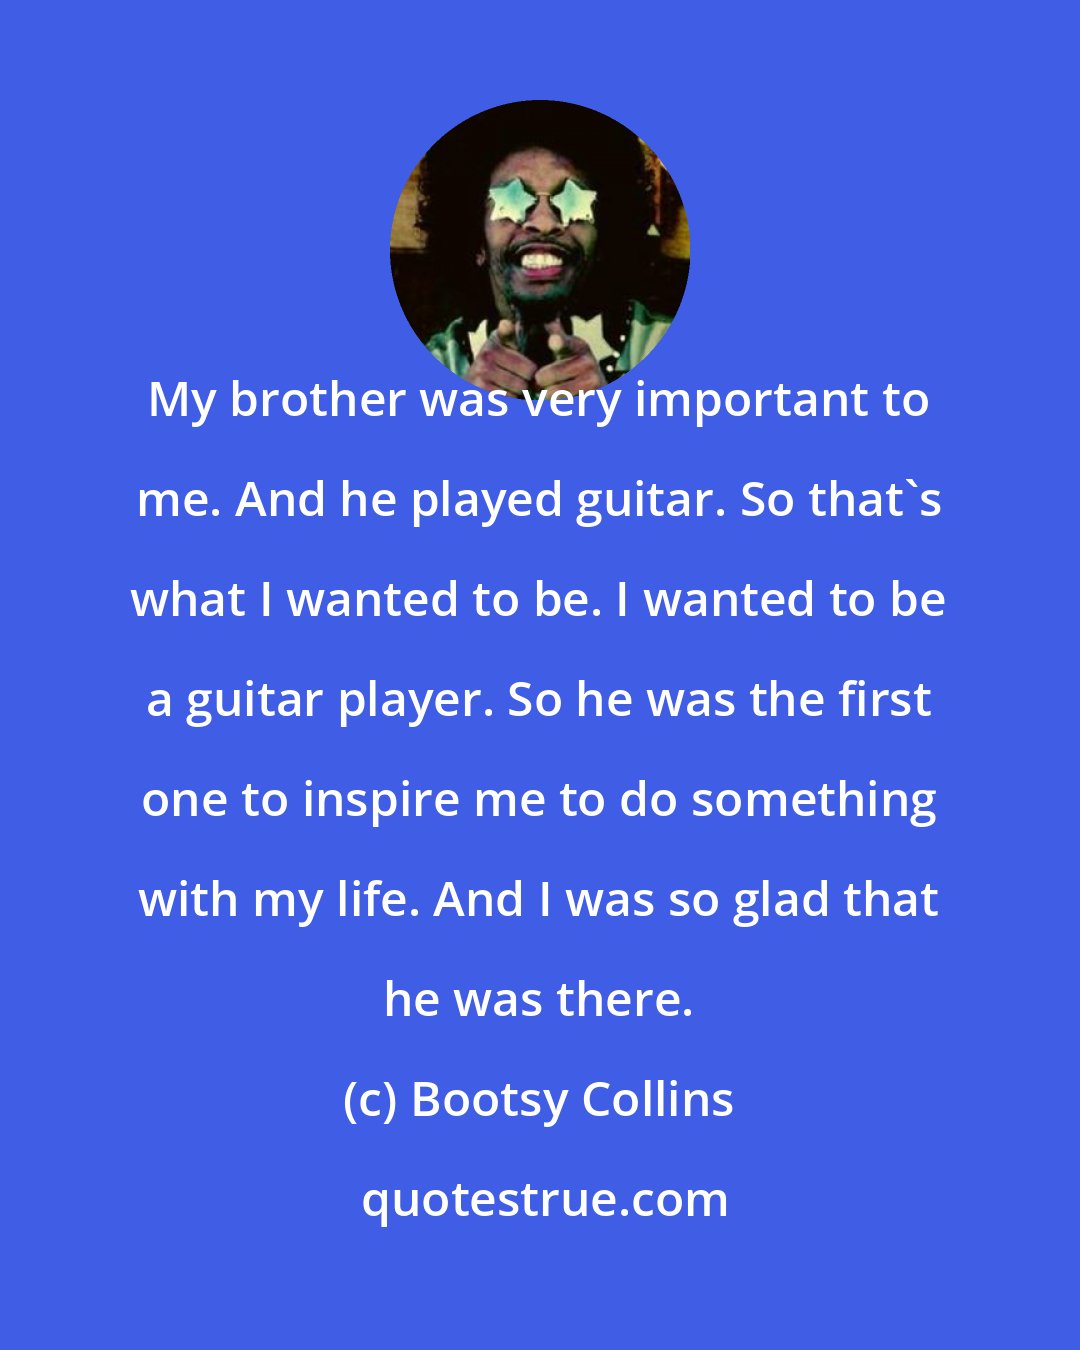 Bootsy Collins: My brother was very important to me. And he played guitar. So that's what I wanted to be. I wanted to be a guitar player. So he was the first one to inspire me to do something with my life. And I was so glad that he was there.